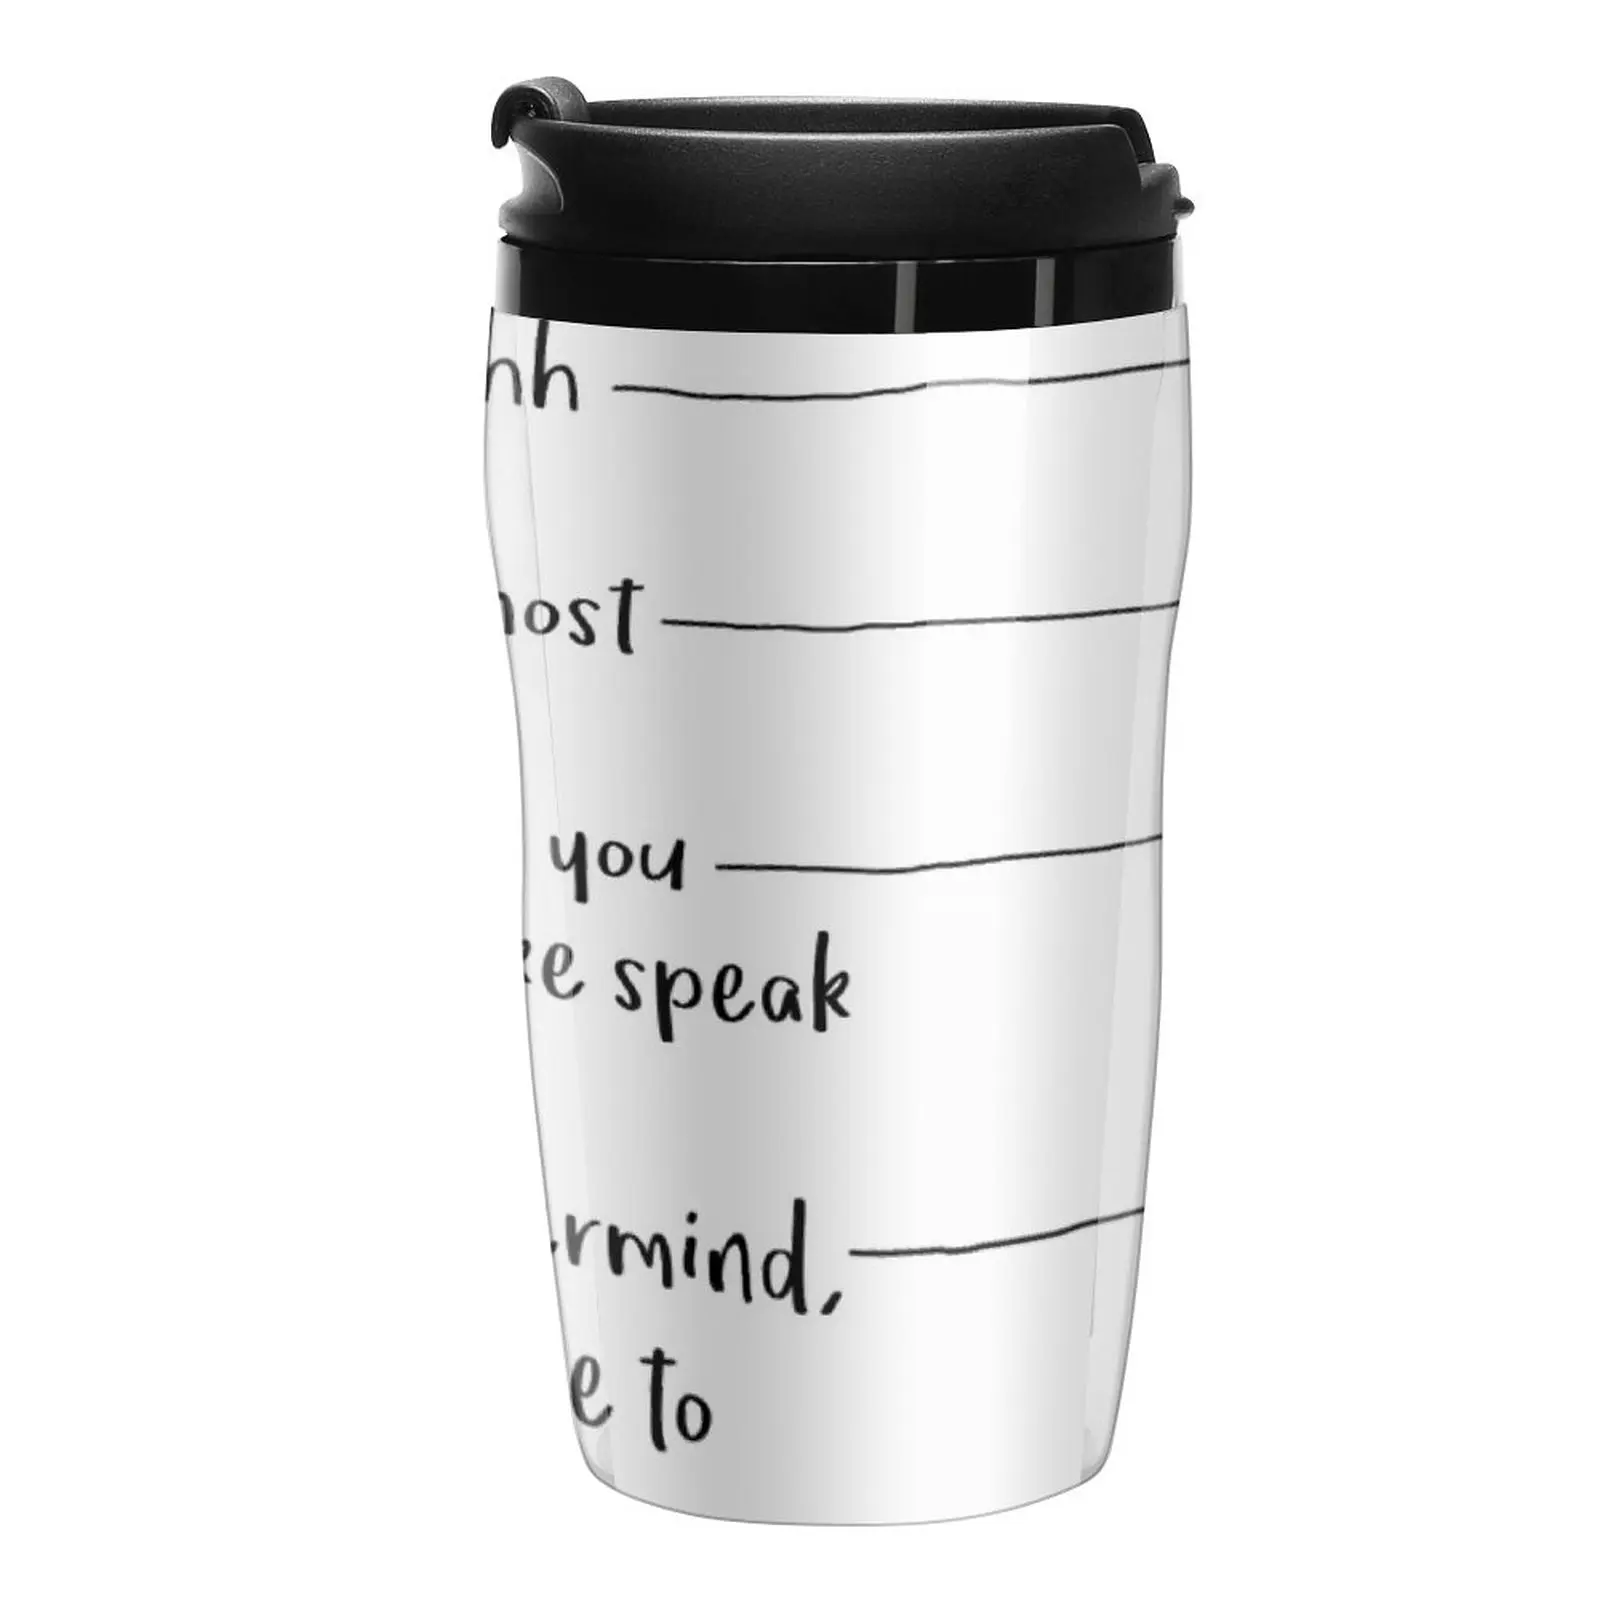 

Funny Coffee Mug Gift - Now You May Speak, Nevermind, I Have to Poop Travel Coffee Mug Black Coffee Cup Coffee Cups Sets